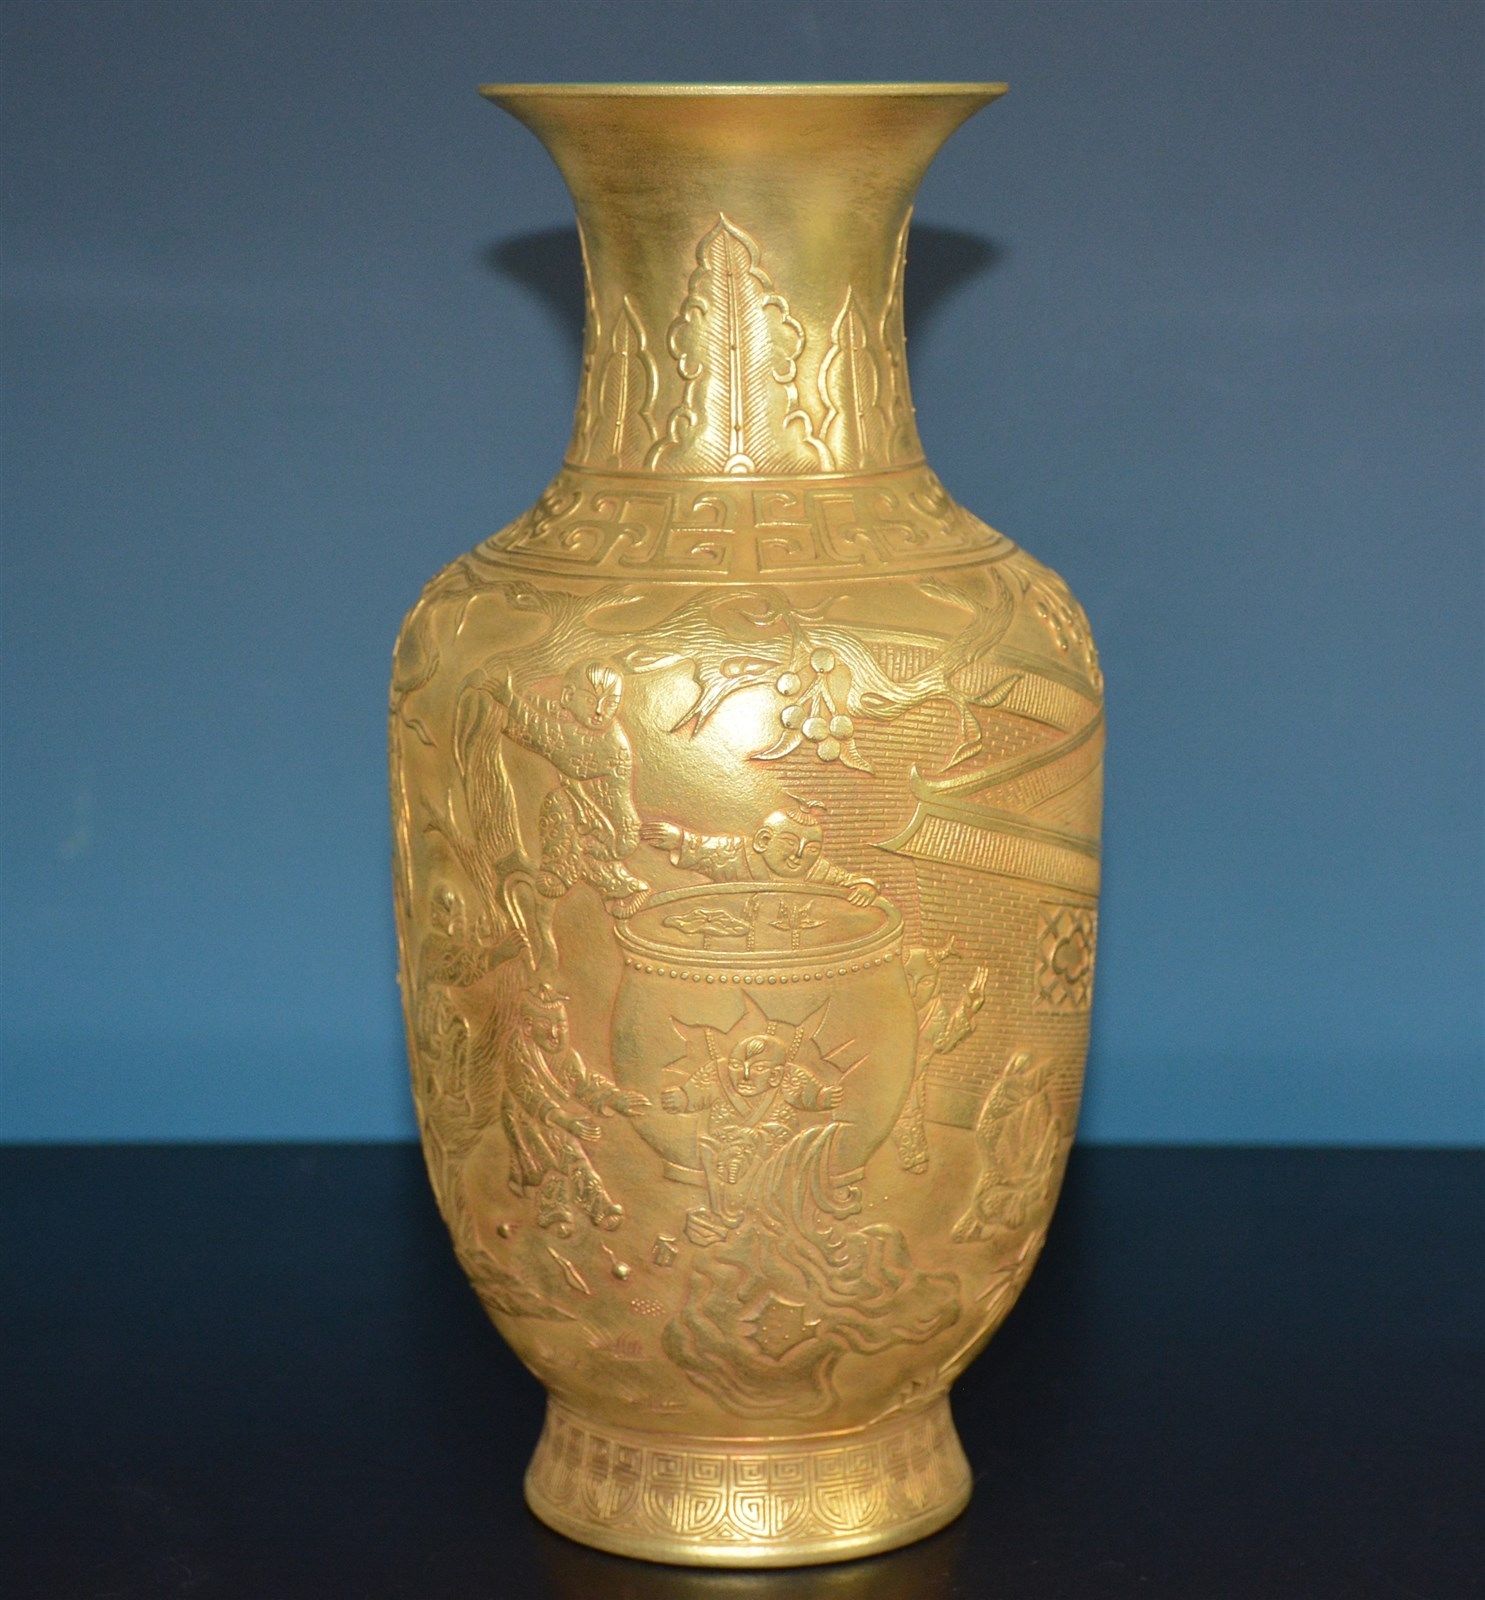 ULTRA RARE CHINESE FULLY GILDED PORCELAIN VASE MARKED QIANLONG T9107